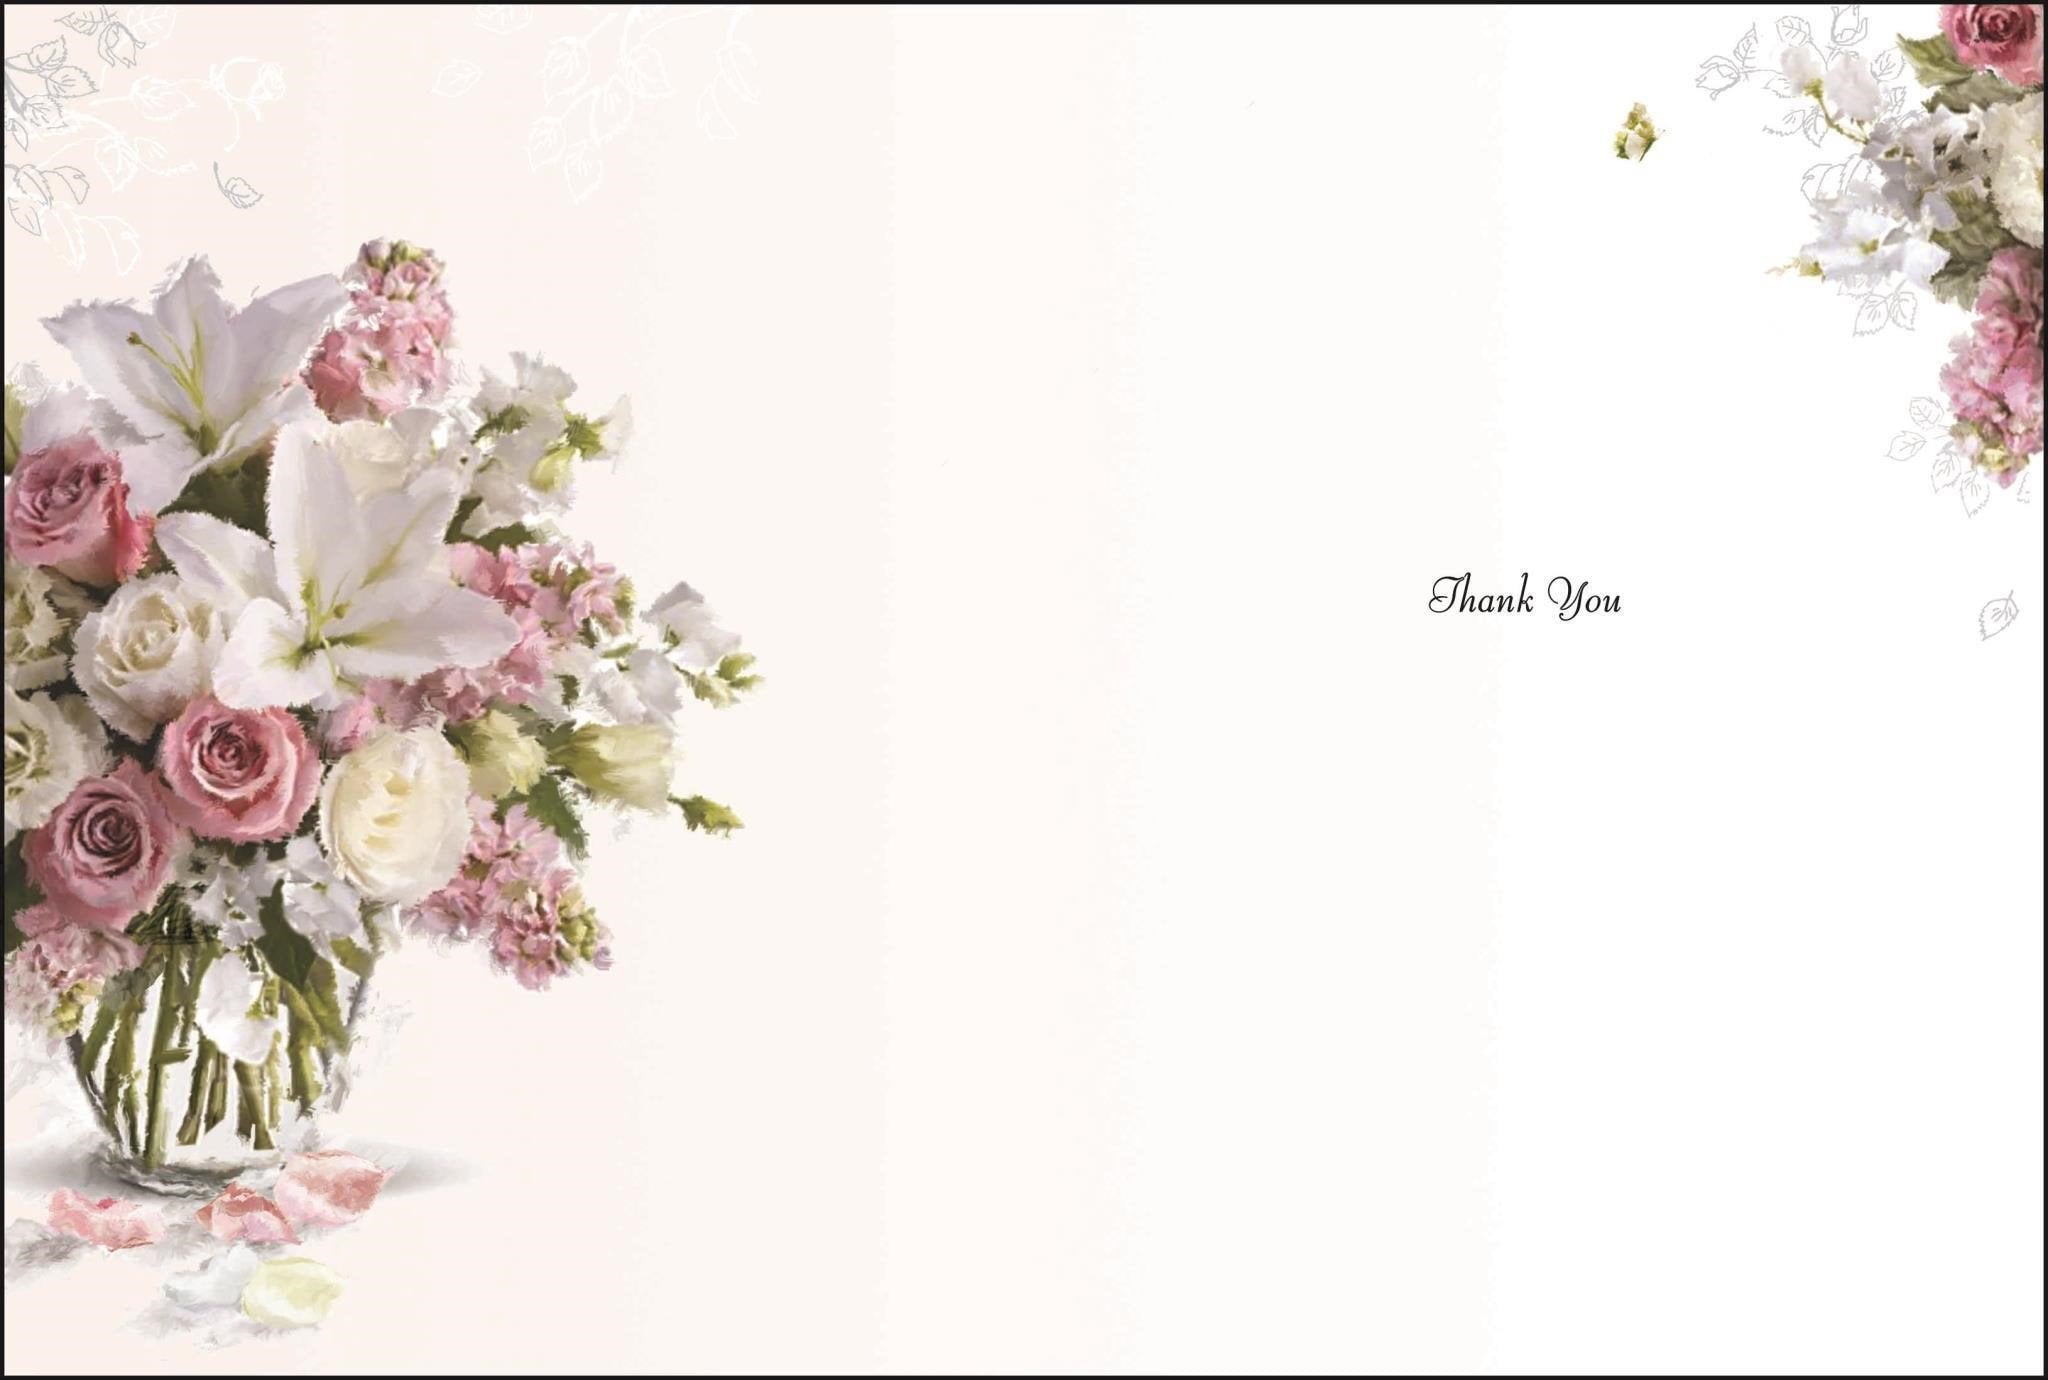 Inside of Thank You Bouquet Greetings Card